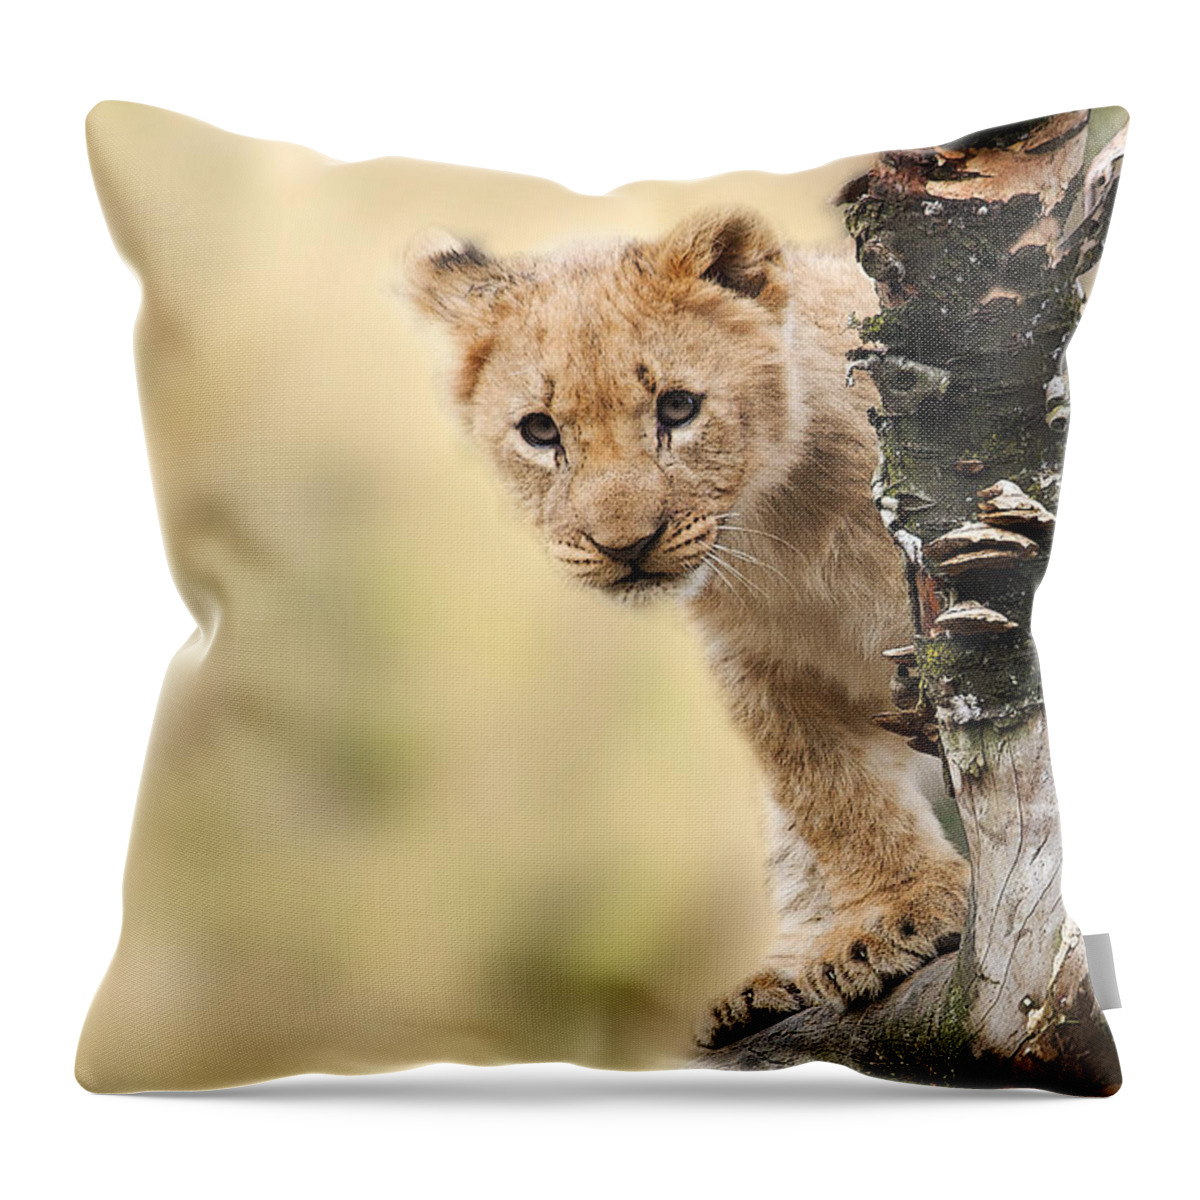 Lion Throw Pillow featuring the photograph Kuckuck by Christine Sponchia